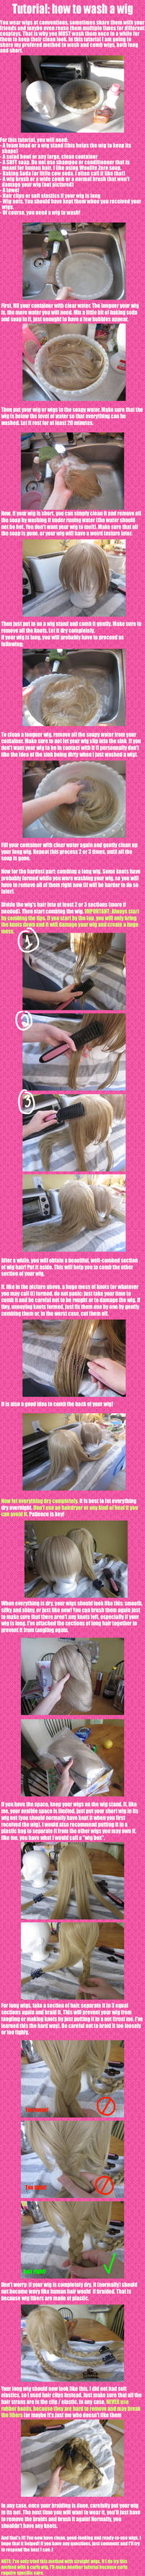 Tutorial: How to wash a wig